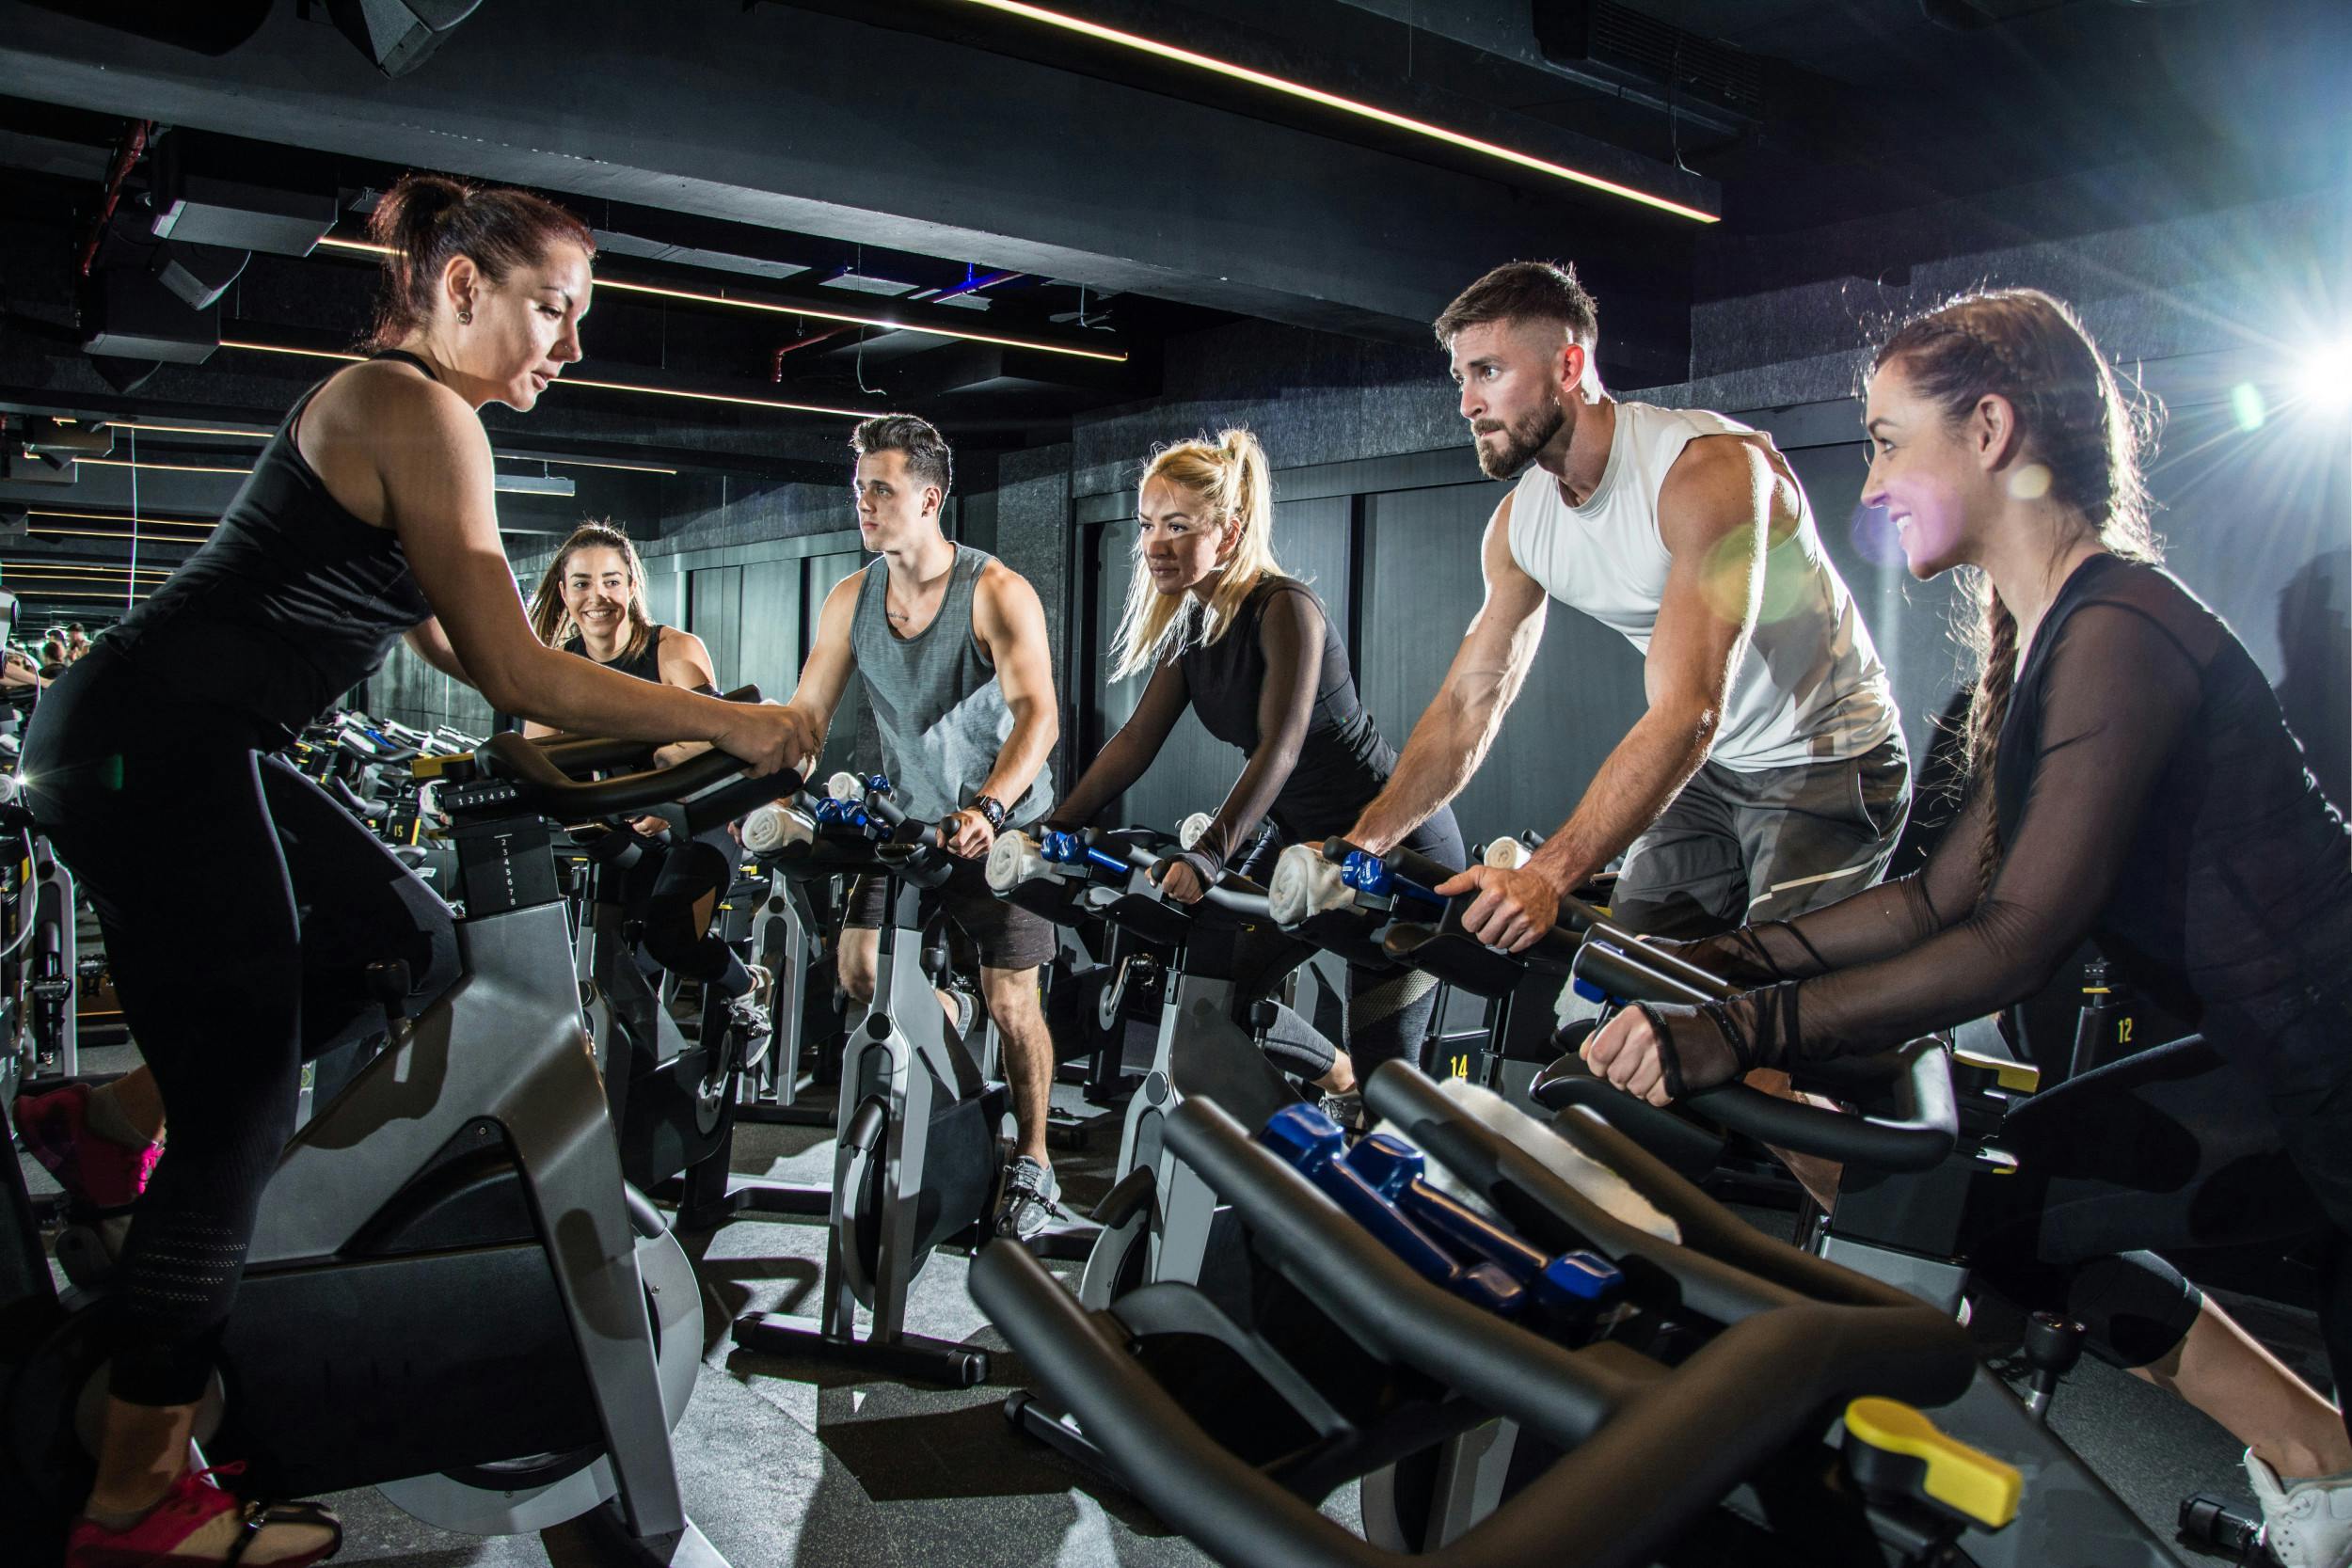 Why Public Relations Is Like Going to the Gym